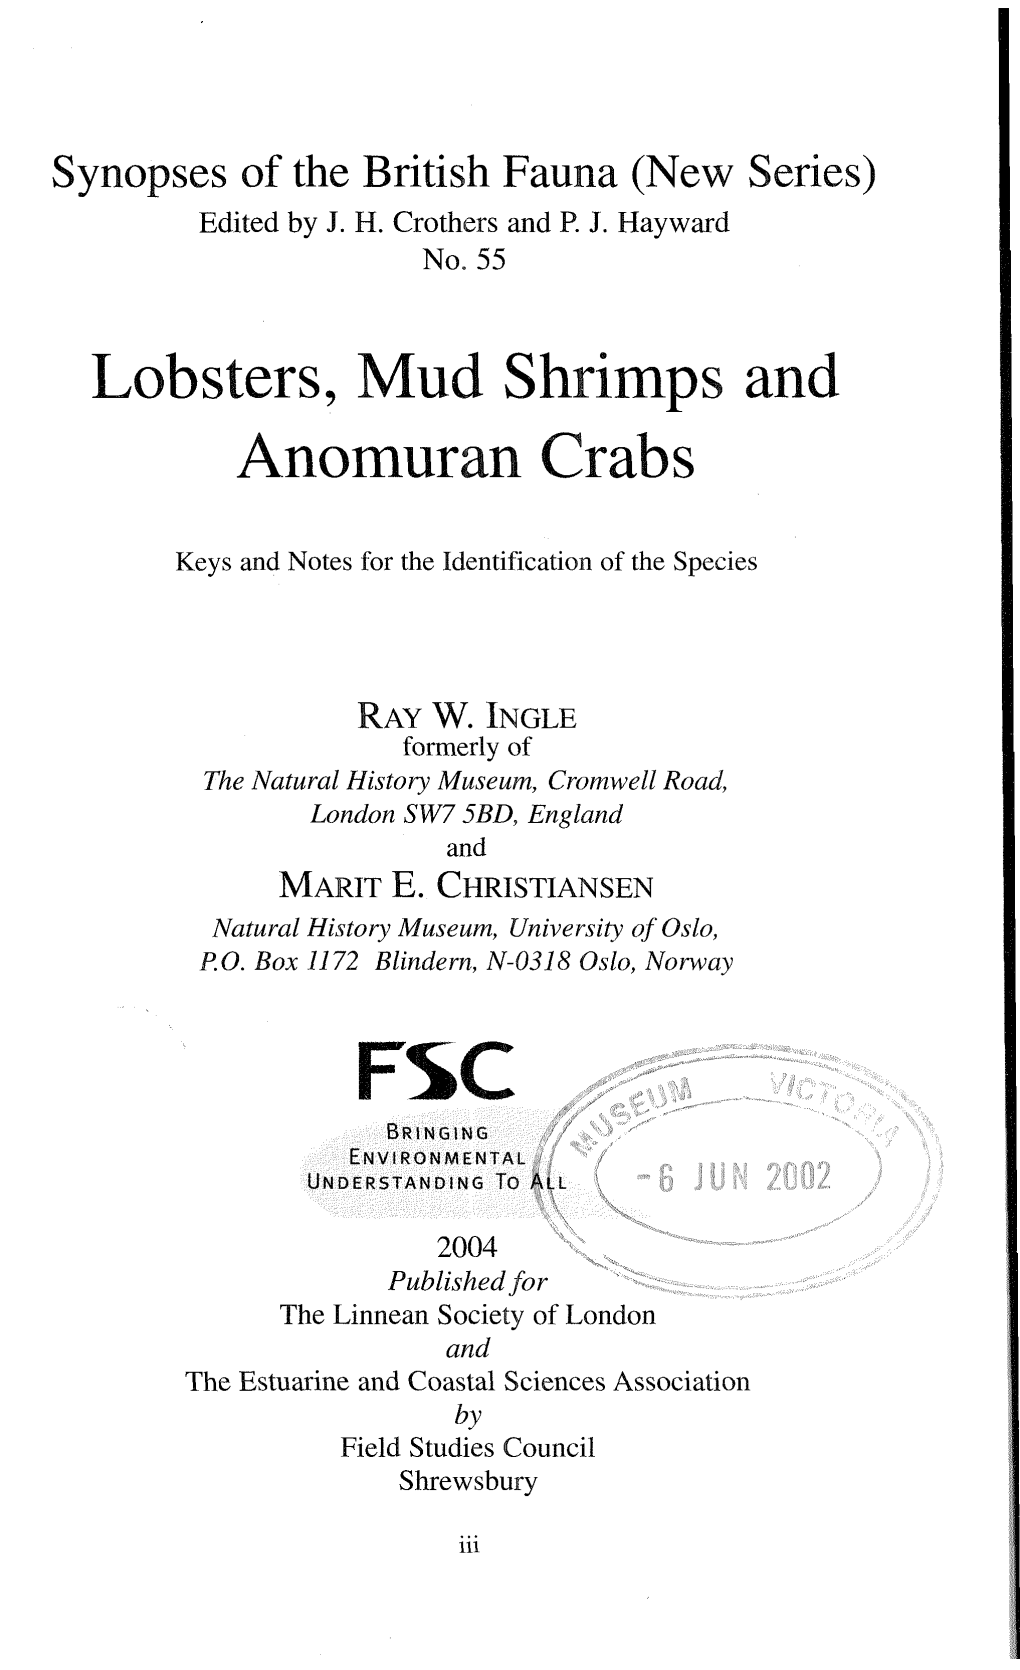 Lobsters, Mud Shrimps and Anomuran Crabs